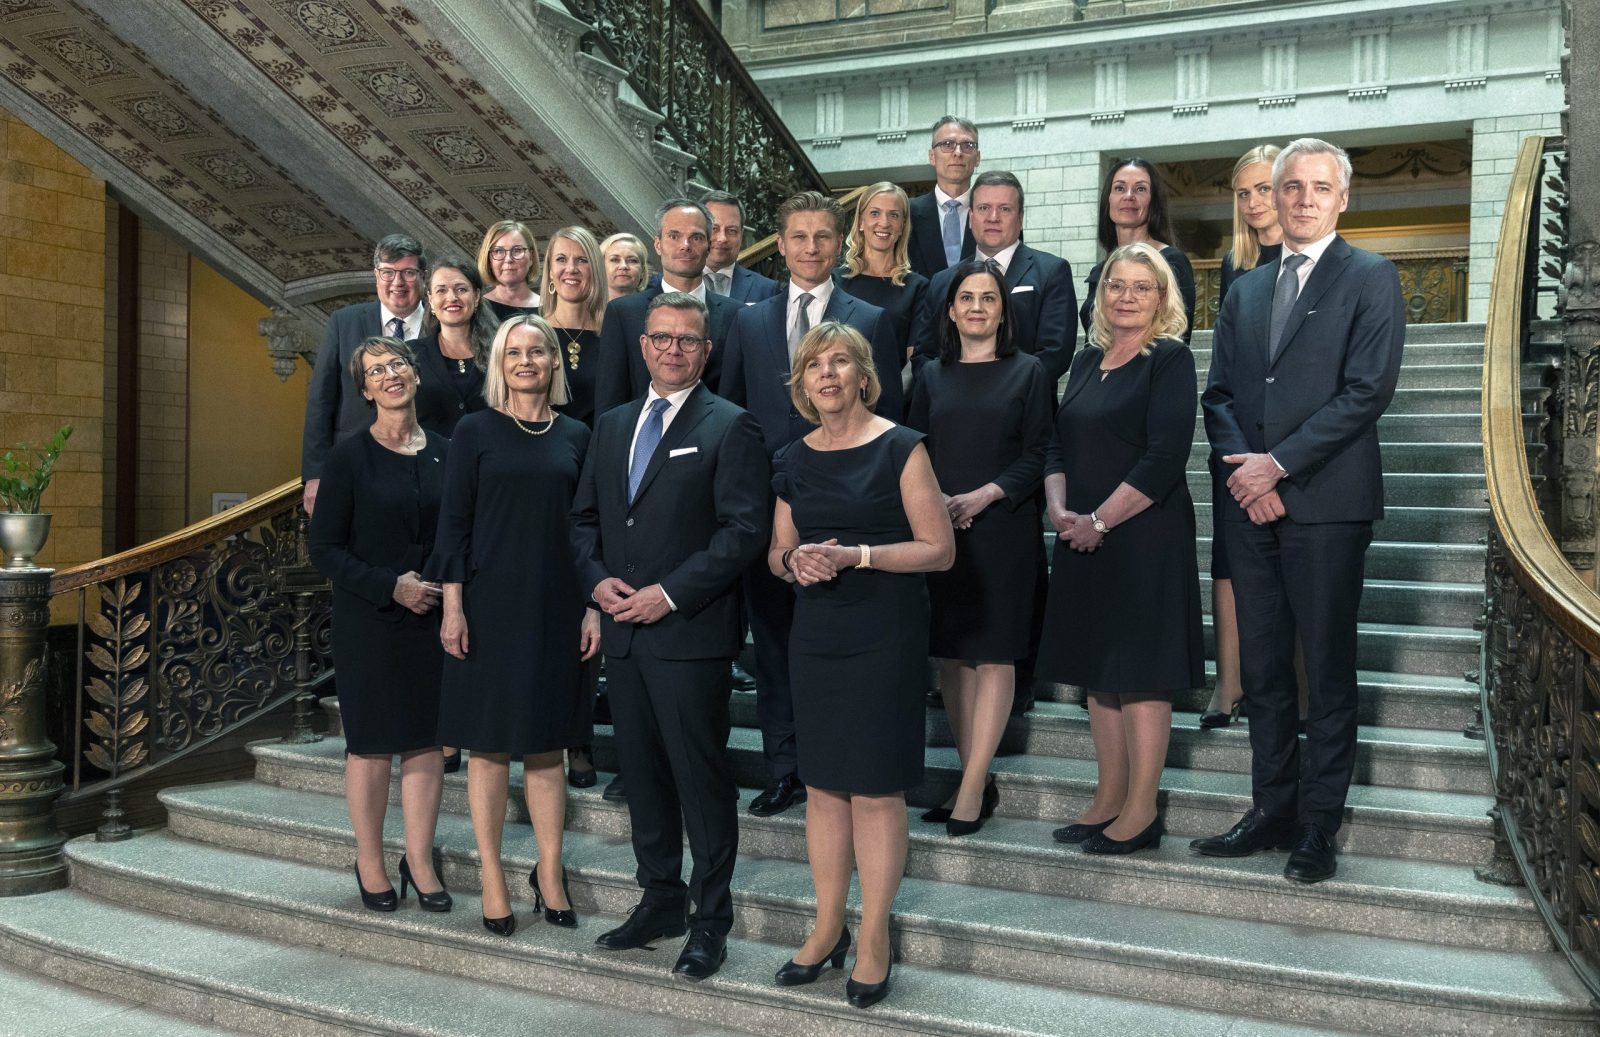 epa10701948 (Front row) New Finland’s Prime Minister Petteri Orpo (2R) with his new government’s ministers Agriculture and Forestry Sari Essayah (L), Finance Riikka Purra (2L) and Justice Anna-Maja Henriksson (R) and other pose for a family photo in Helsinki, Finland, 20 June 2023. The President of the Republic appointed Finland’s 77th Government, led by Prime Minister Petteri Orpo with 19 ministers.  EPA/MAURI RATILAINEN